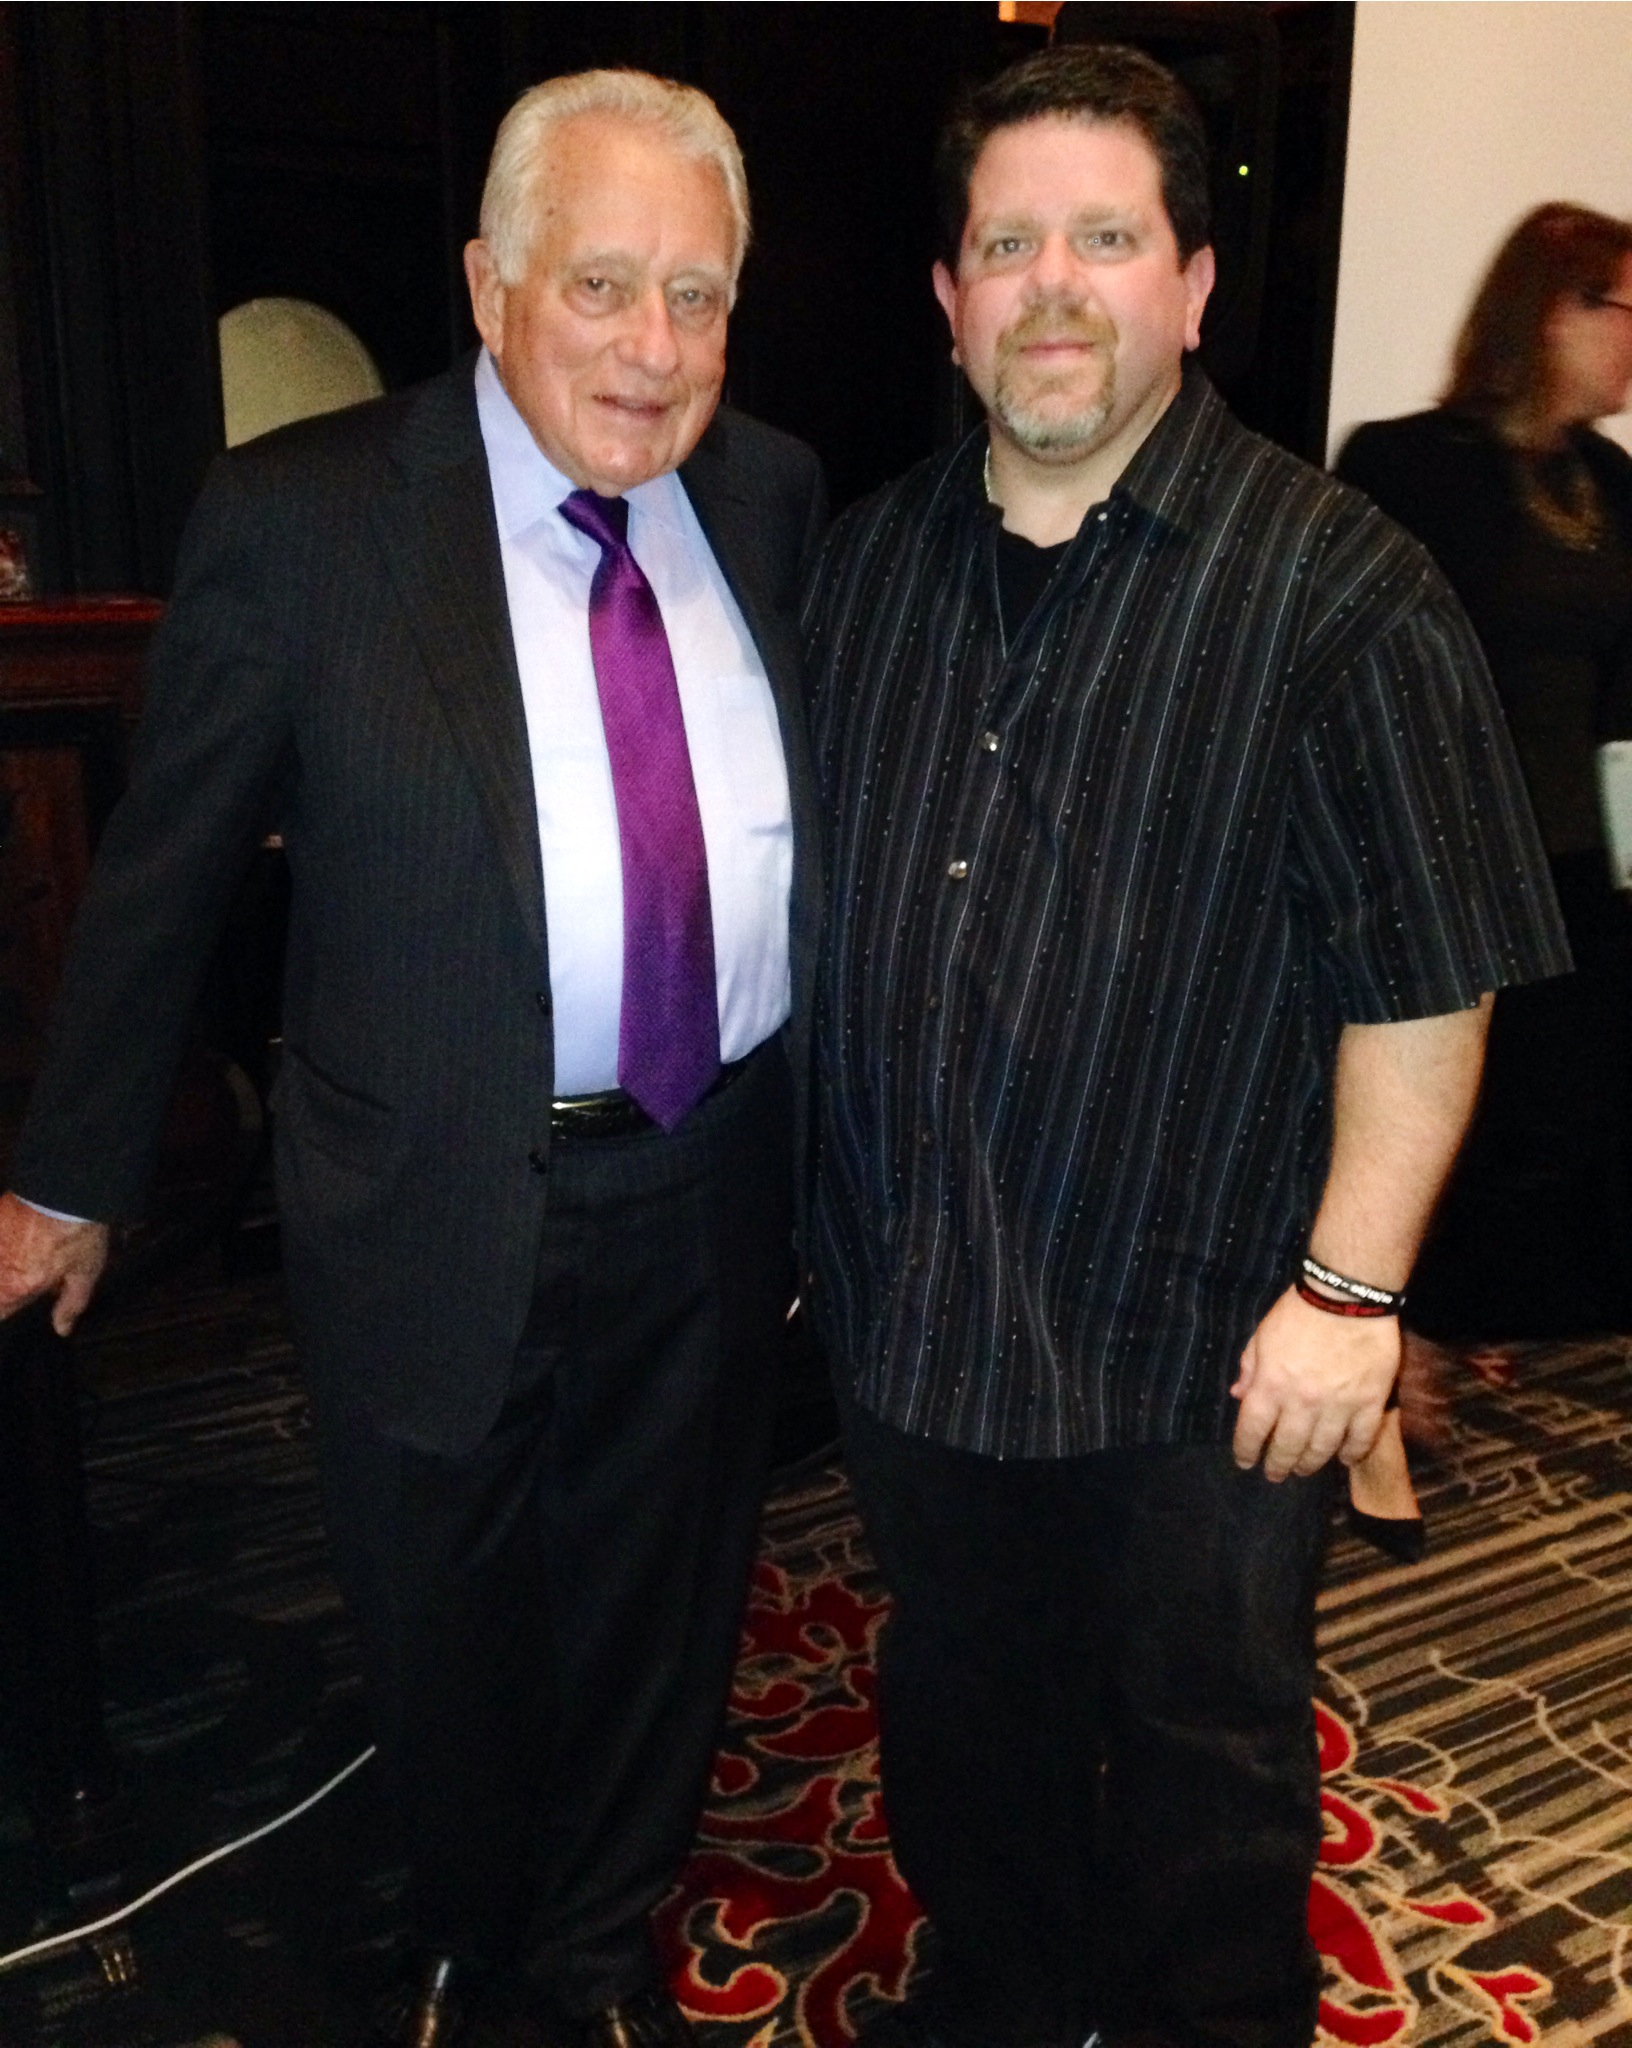 What an honor to stand with U.S. Secret Service agent Clint Hill. Mr. Hill was Jackie Kennedy's agent, and is the agent who reacted and ran to the back of the Presidential limo in Dallas, 1963. A true American Hero to me.